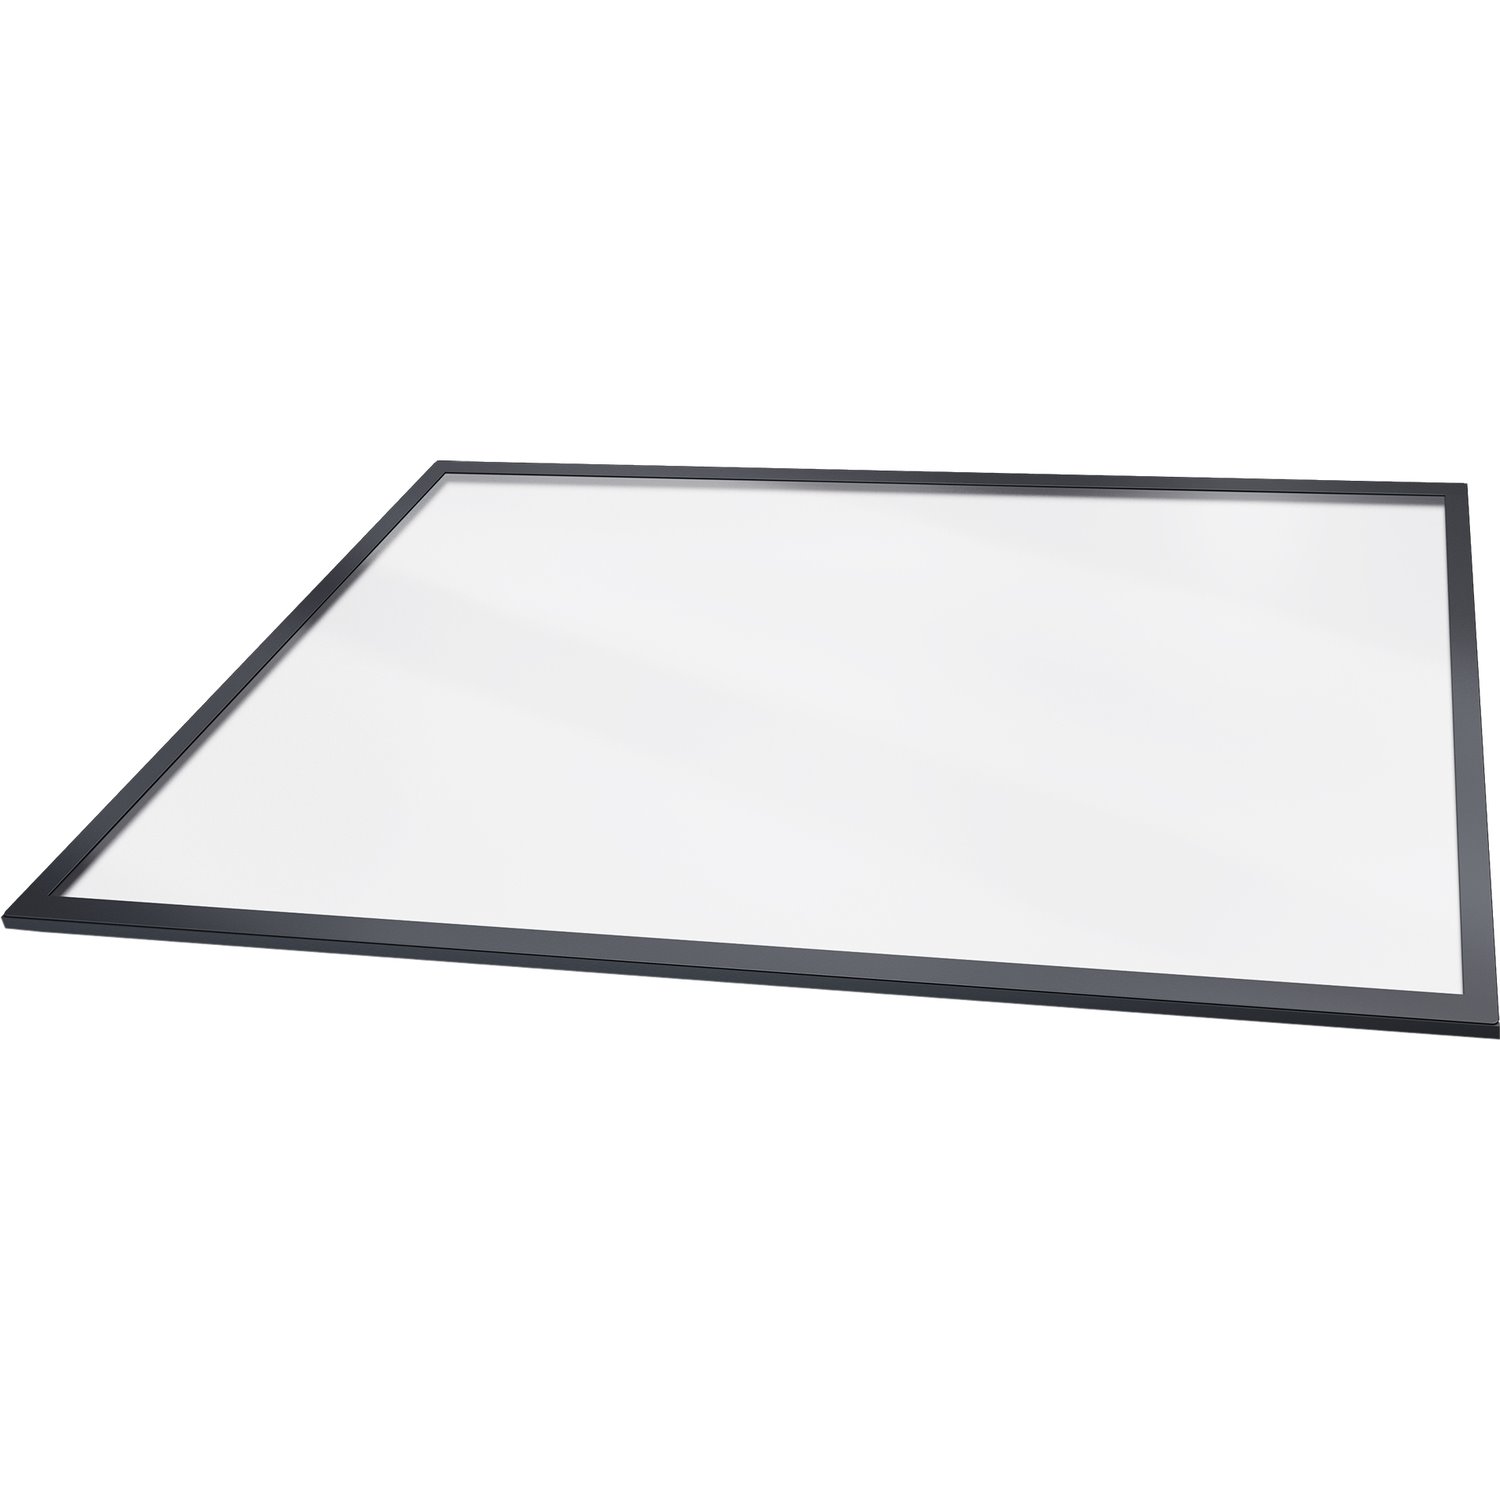 APC by Schneider Electric Ceiling Panel - 900mm (36in)